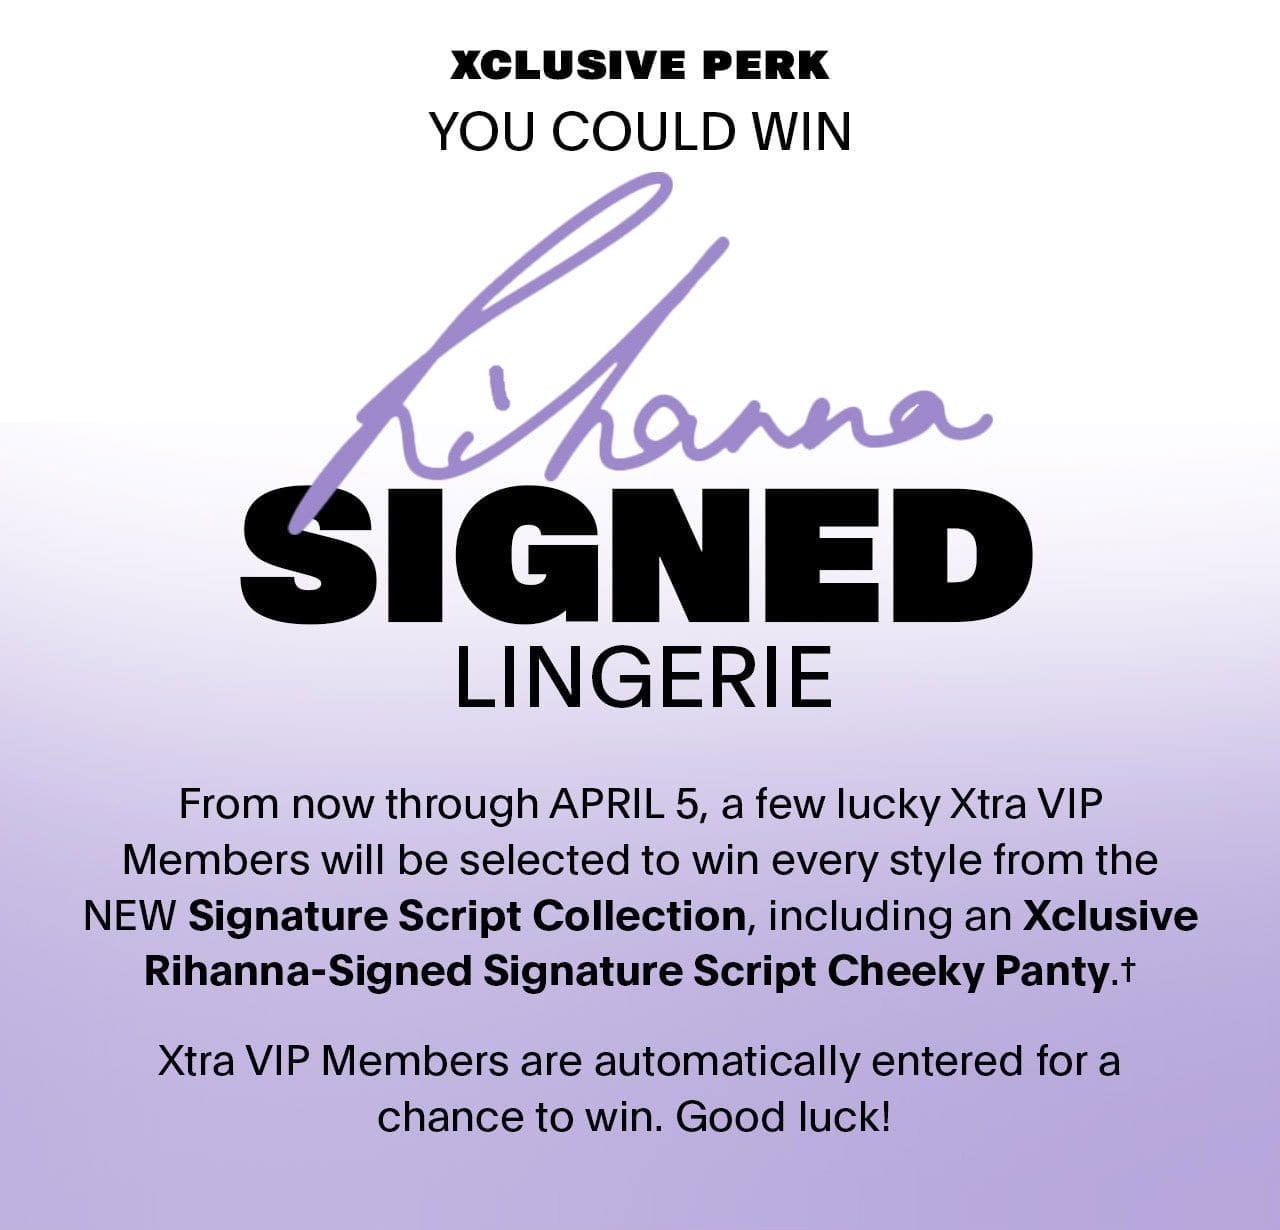 You Could Win RIHANNA-SIGNED LINGERIE From now through APRIL 5, a few lucky Xtra VIP Members will be selected to win every style from the NEW Signature Script Collection, including an Xclusive Rihanna-Signed Signature Script Cheeky Panty.* 